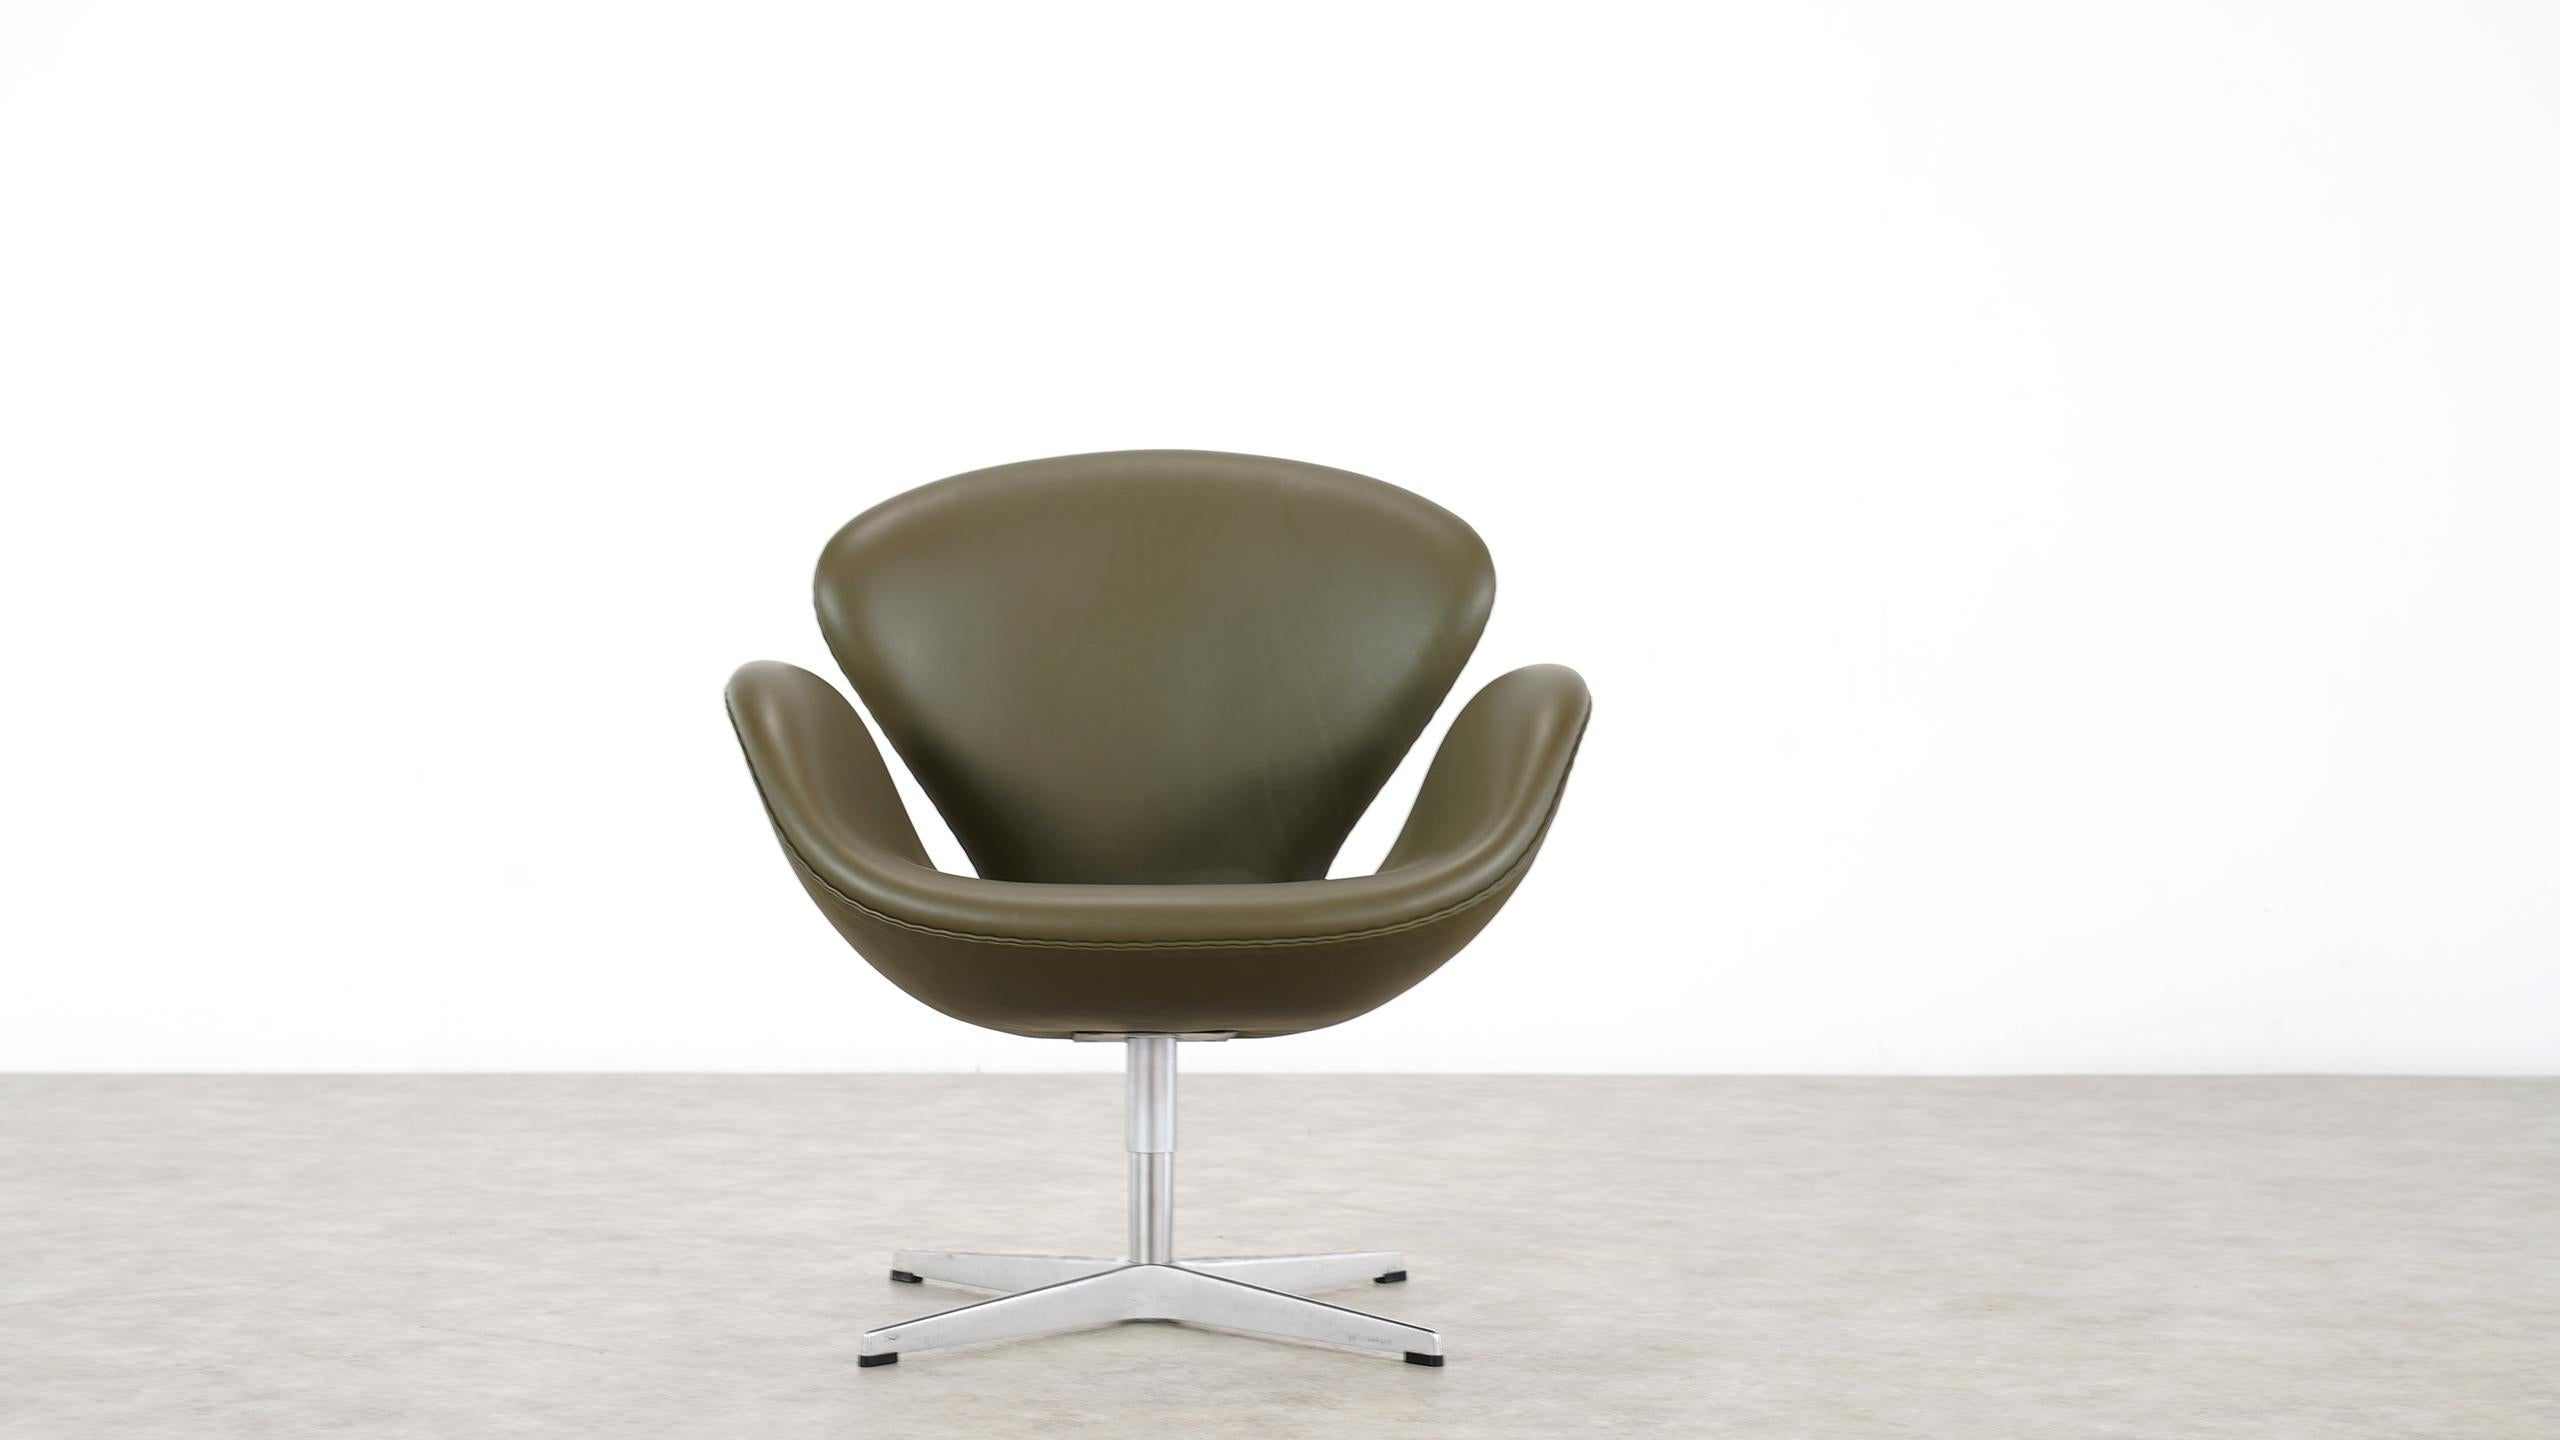 The Swan chair is the icon of Danish design. The brand and serial number 11000069142 is engraved on the underside of the frame. The swivel chair returns automatically to the original position. The armchair is upholstered in leather and recolored